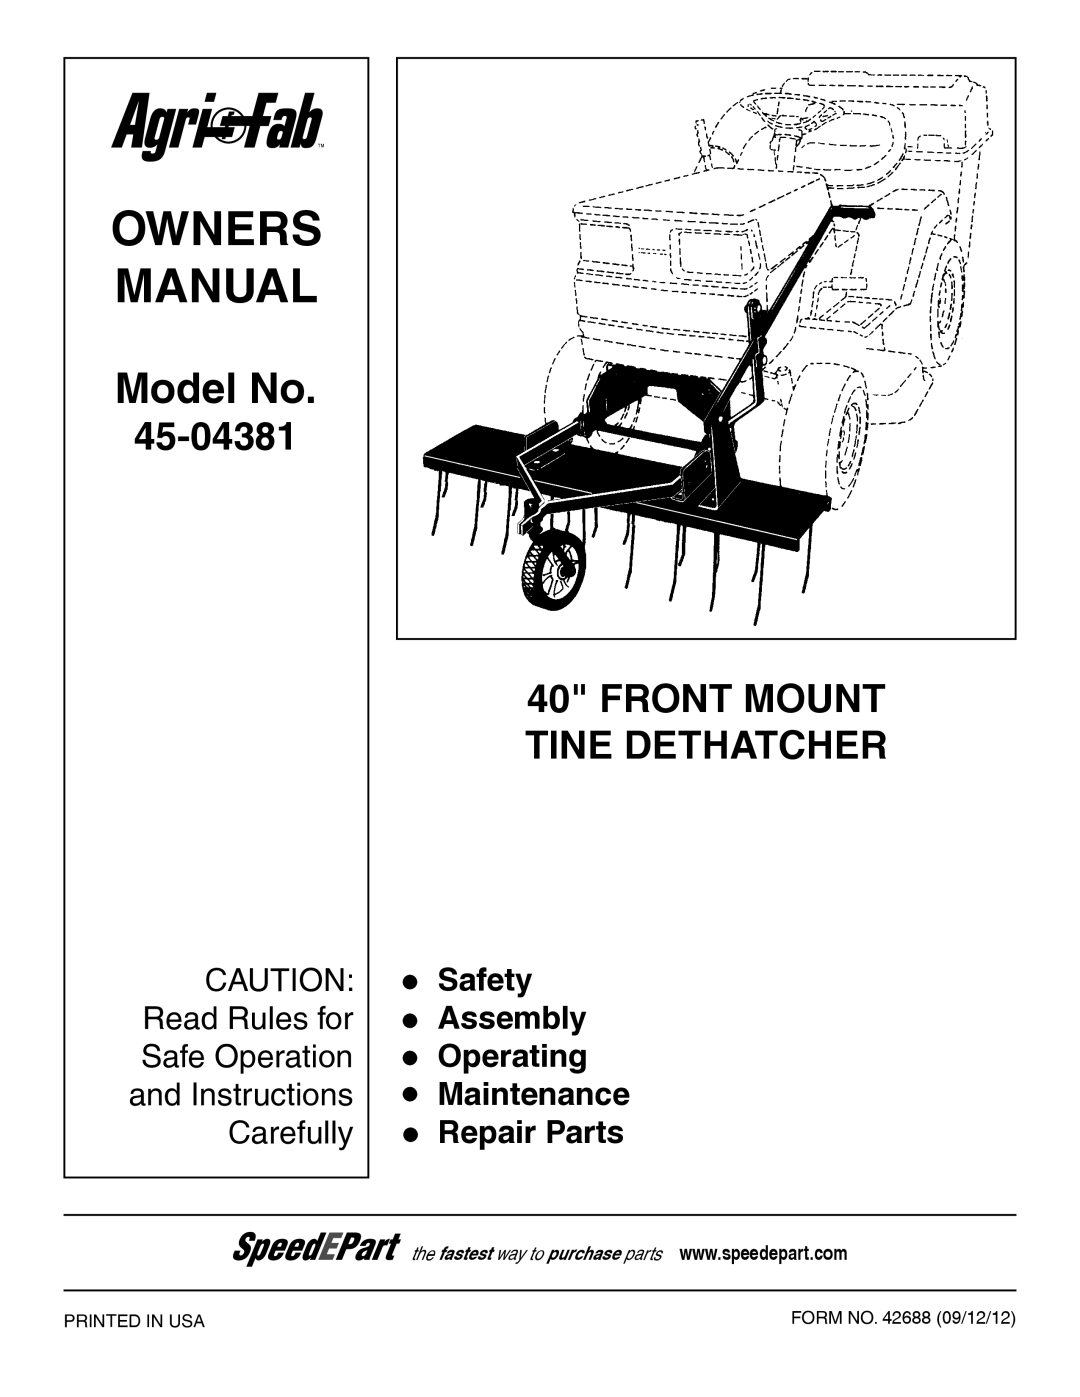 Sears 45-04381 owner manual Owners Manual, Model No, Front Mount Tine Dethatcher 